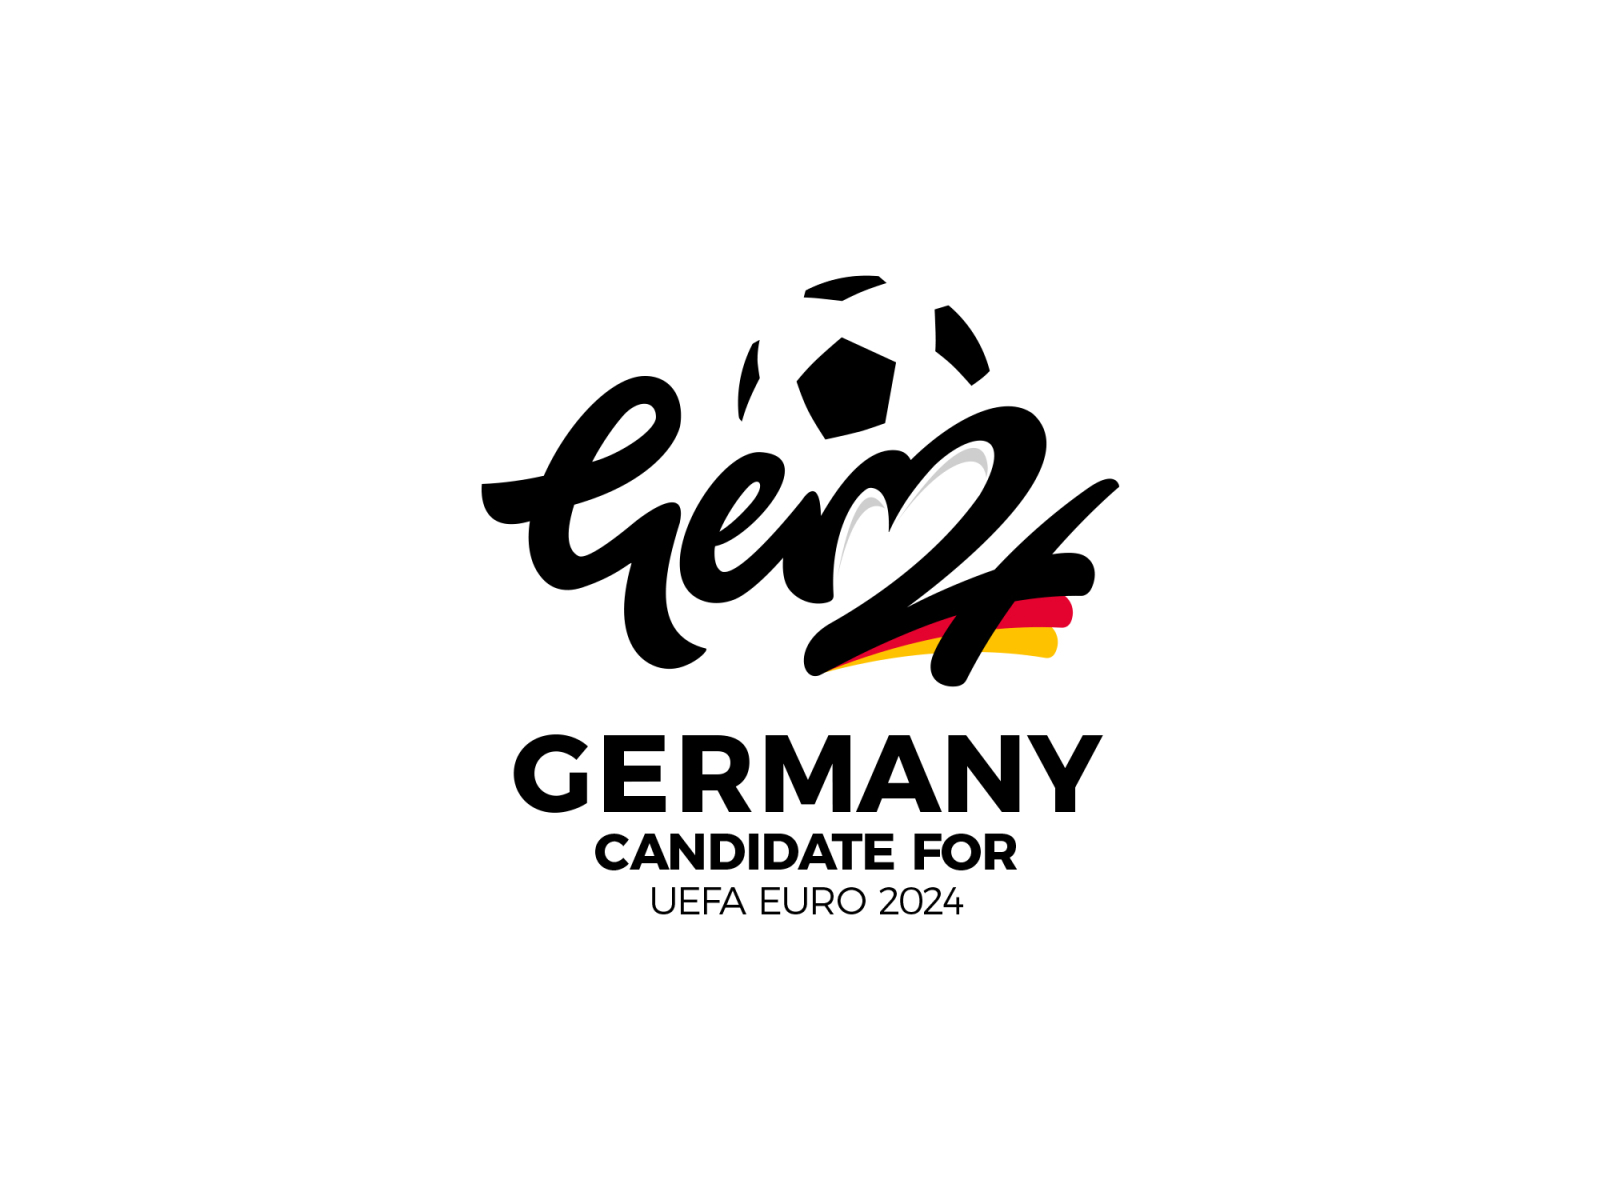 Germany EURO 2024 Version 1 by Undercover Design on Dribbble